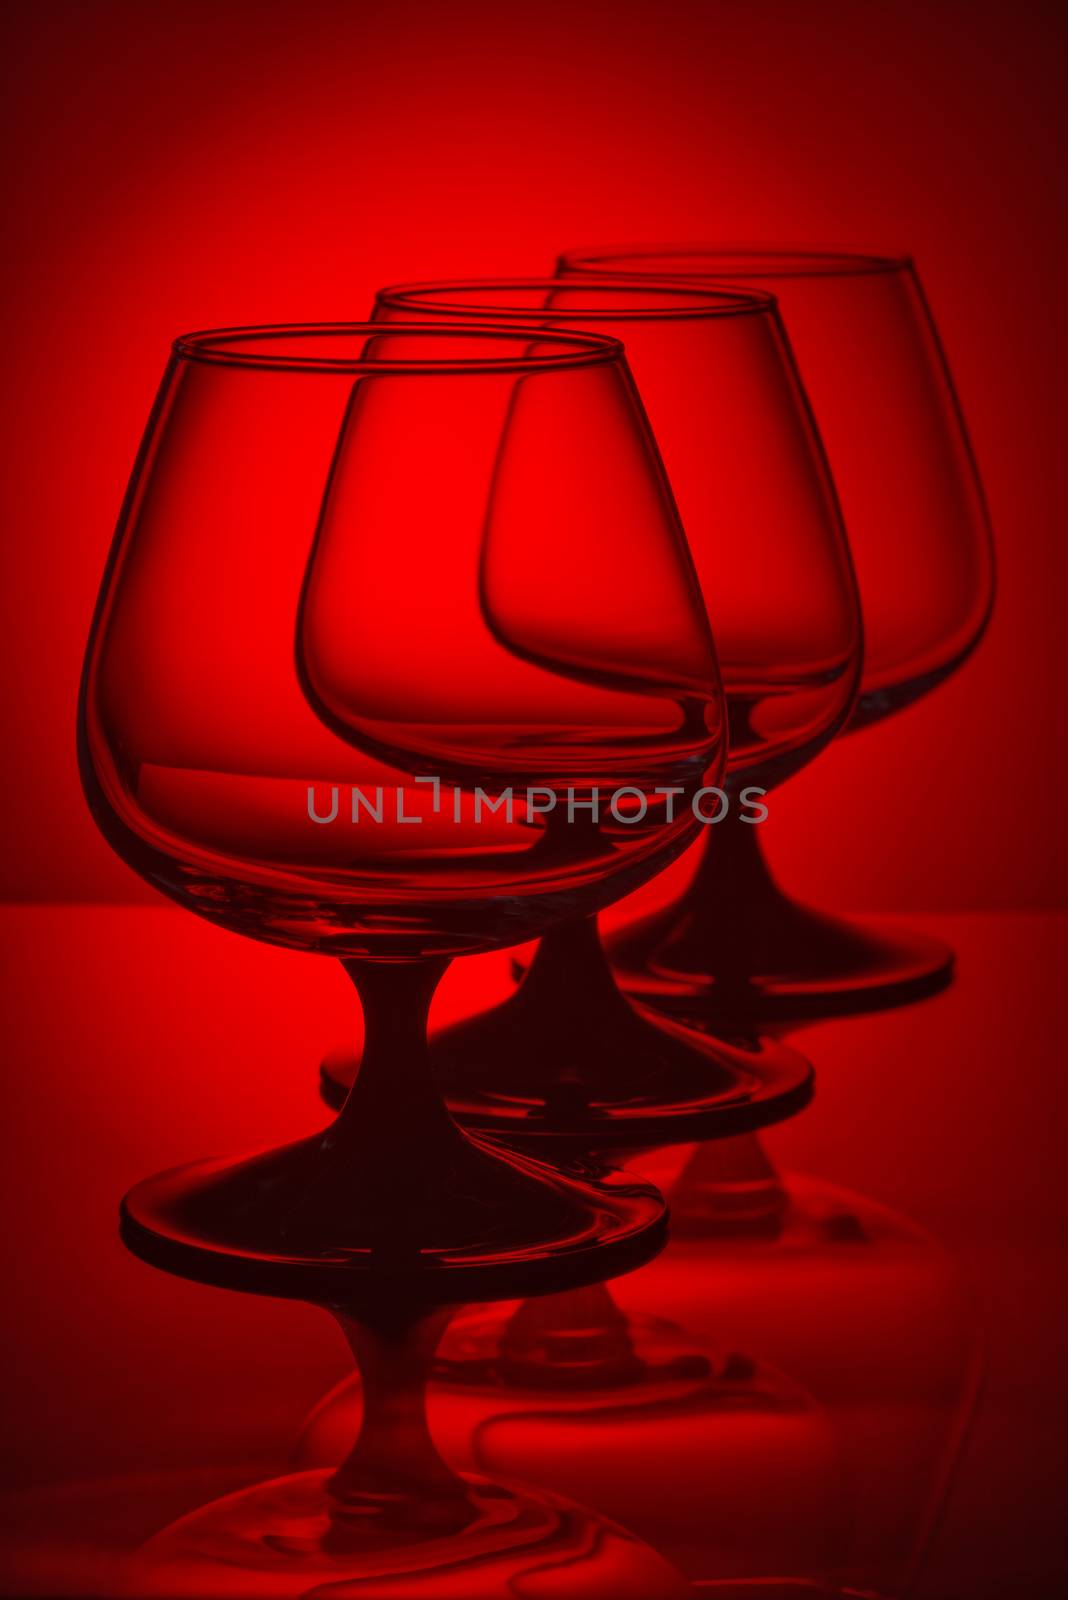 Three glasses in red light by fotooxotnik